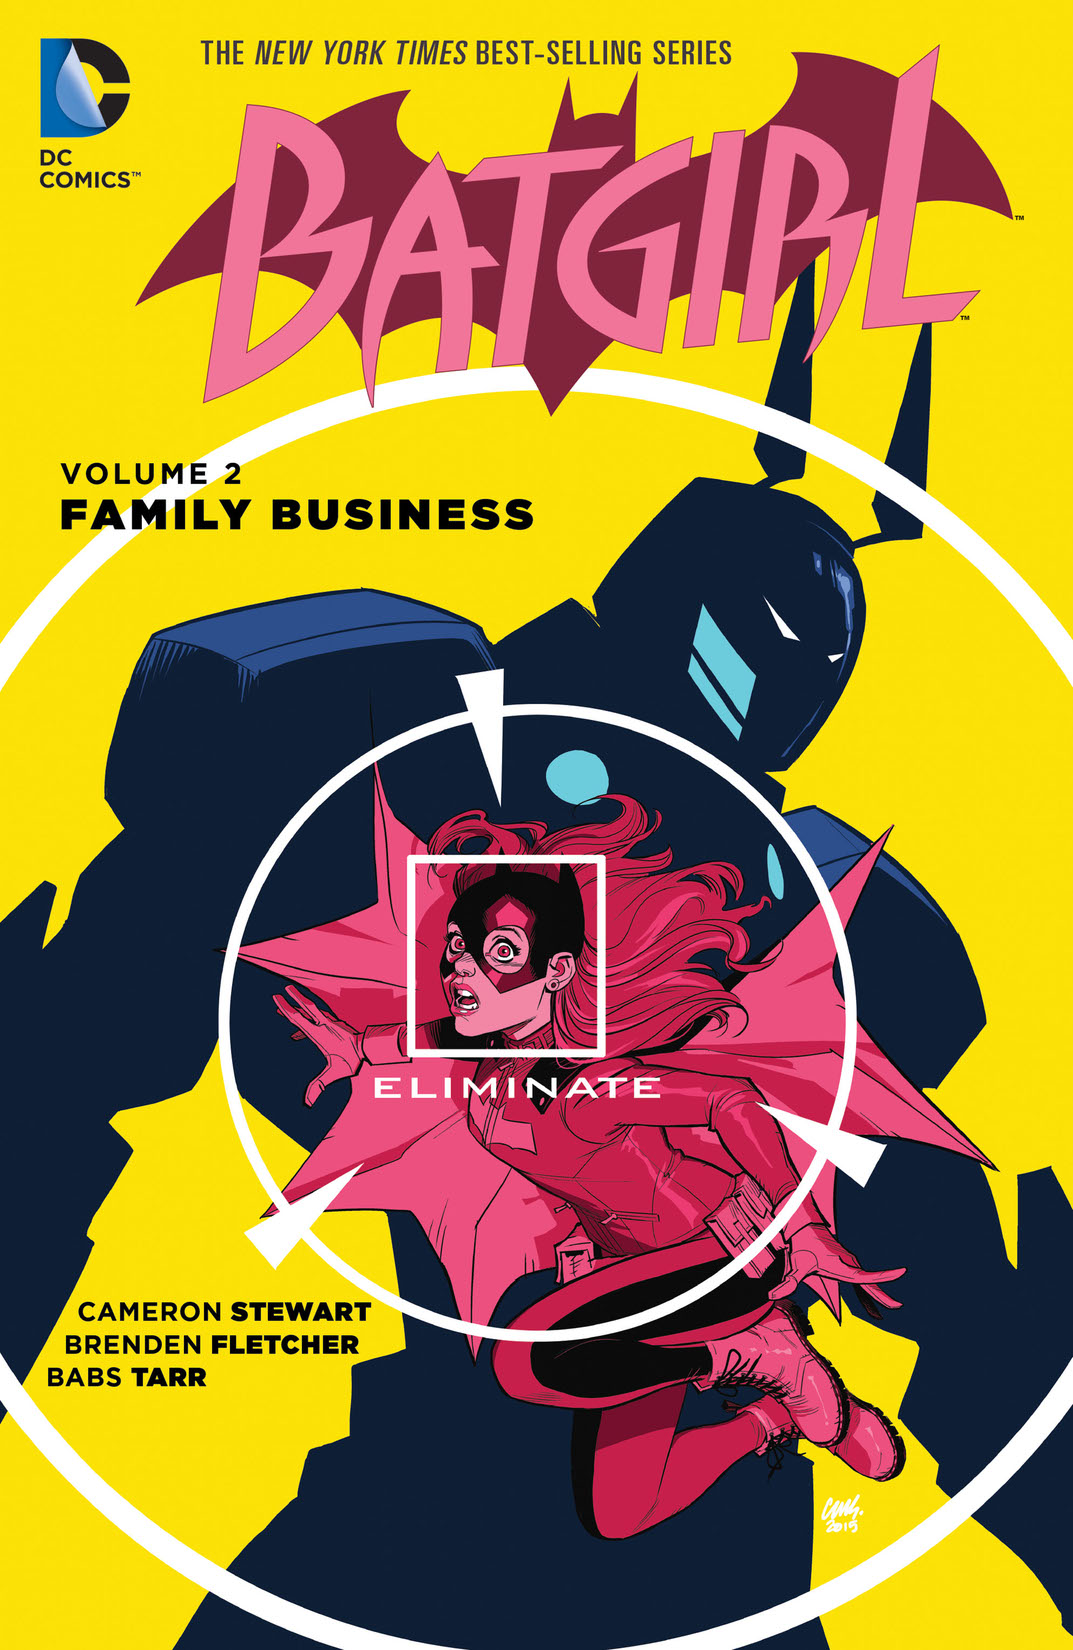 Batgirl Vol. 2: Family Business preview images